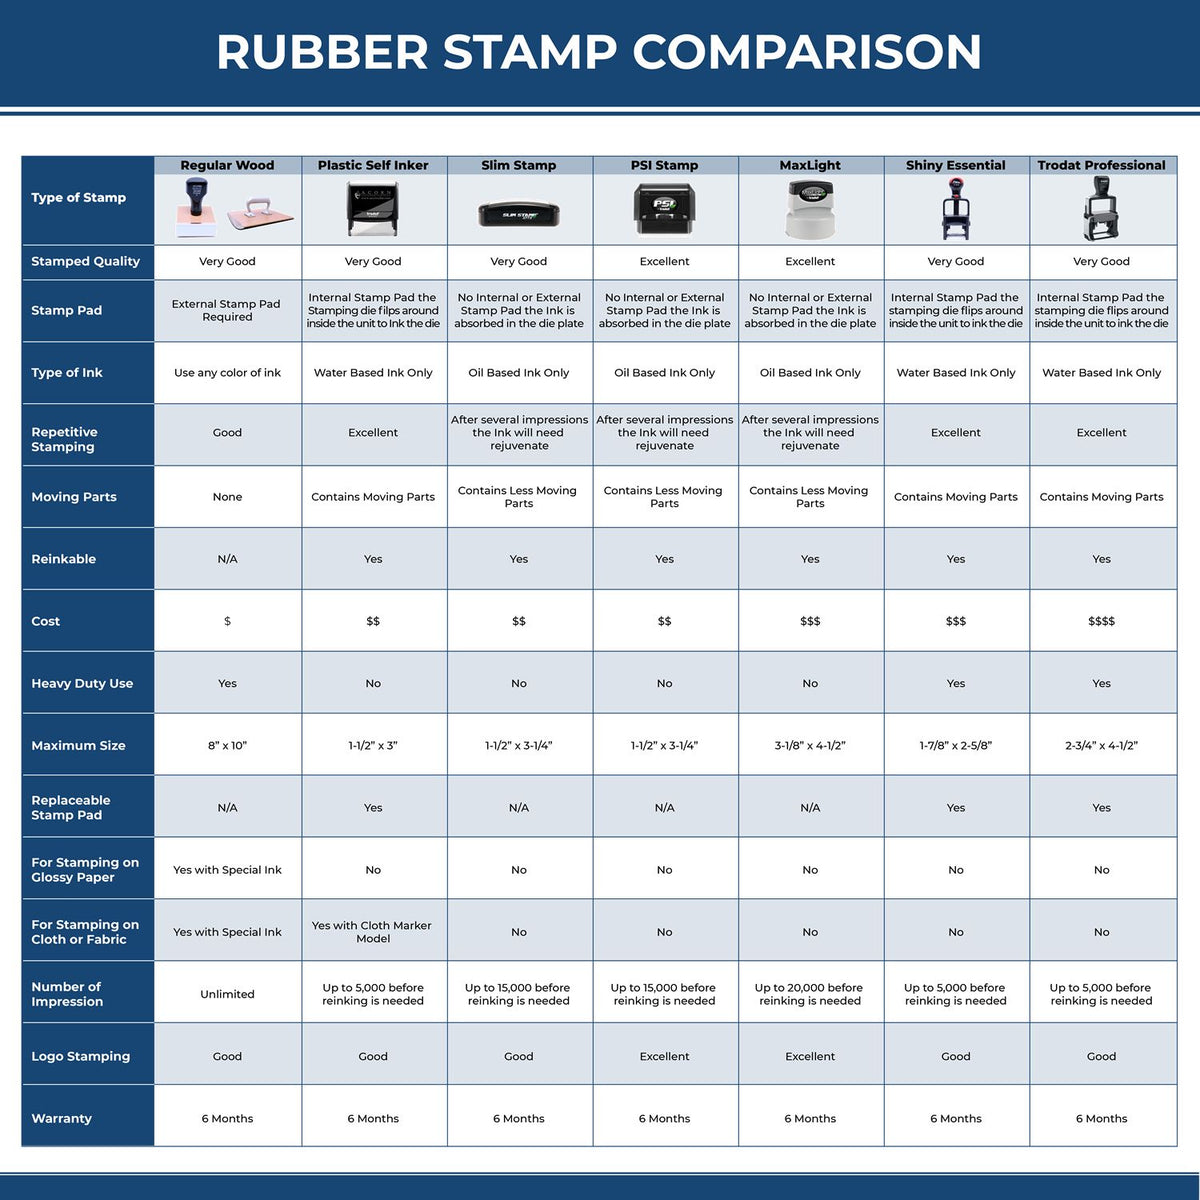 A comparison chart for the different types of mount models available for the Heavy-Duty Connecticut Rectangular Notary Stamp.